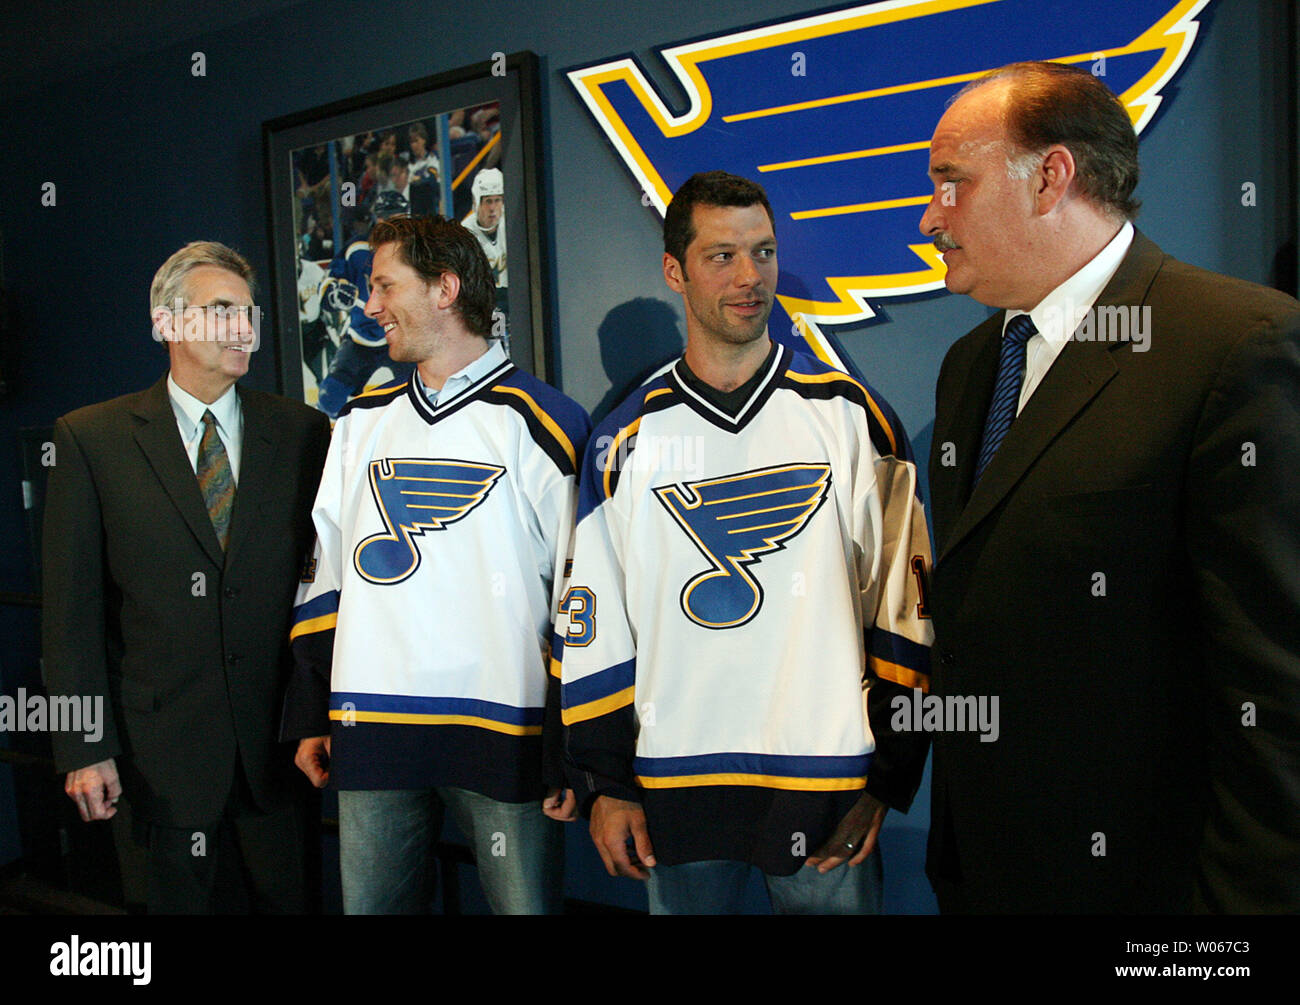 New St. Louis Blues President John Davidson (R) chats with newly signed free agent right winger Bill Guerin While team general manager Larry Pleau (L) talks with defenseman Jay McKee, following a press conference at the Savvis Center in St. Louis on July 6, 2006. McKee comes to St. Louis from Buffalo where he played 10 seasons and Guerin from Dallas. Guerin also spent seven seasons in New Jersey, four in Edmonton and two in Boston. (UPI Photo/Bill Greenblatt) Stock Photo